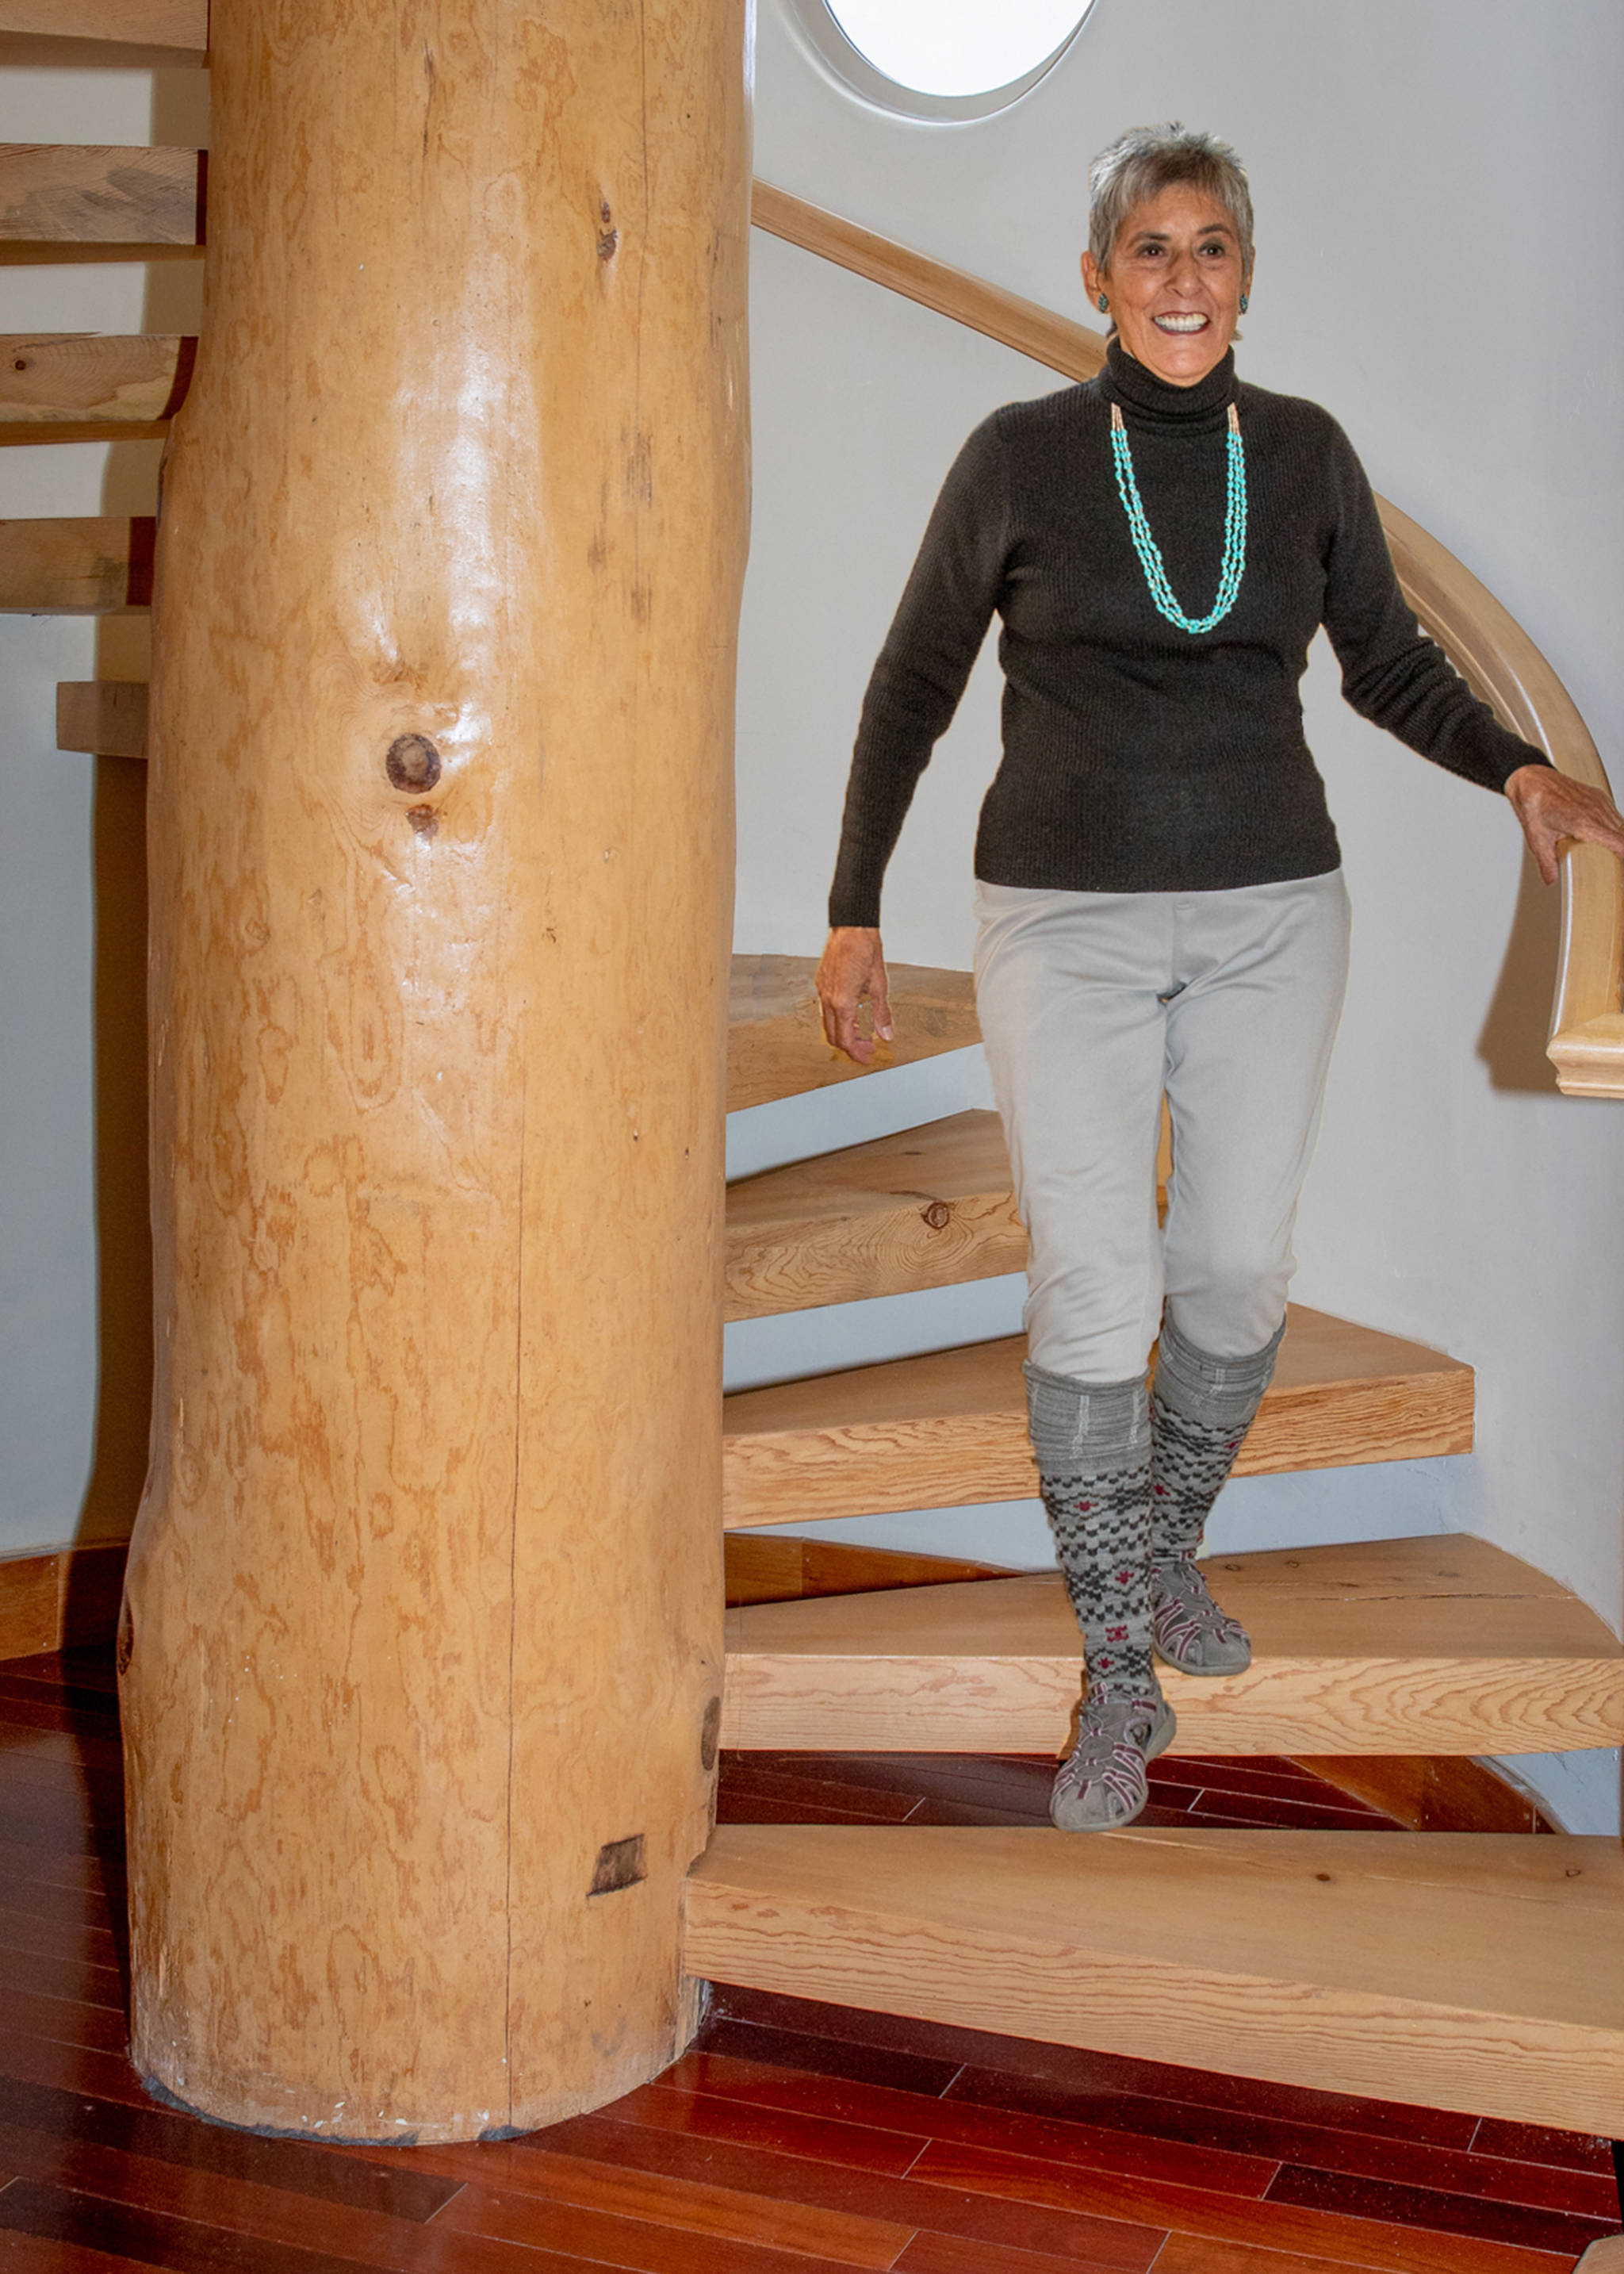 Nov. 11, 2018: Even if it is dreary and gray outside, autumn fashion can still shine indoors. Linda Dahl is a perfect example. She combines fitted jean style leggings with a cozy black wool sweater from Charter Club. Her accessories include colorful knee socks, Croft & Barrow sandals, a vibrant turquoise necklace and earrings from Arizona, and her ever-present smile.